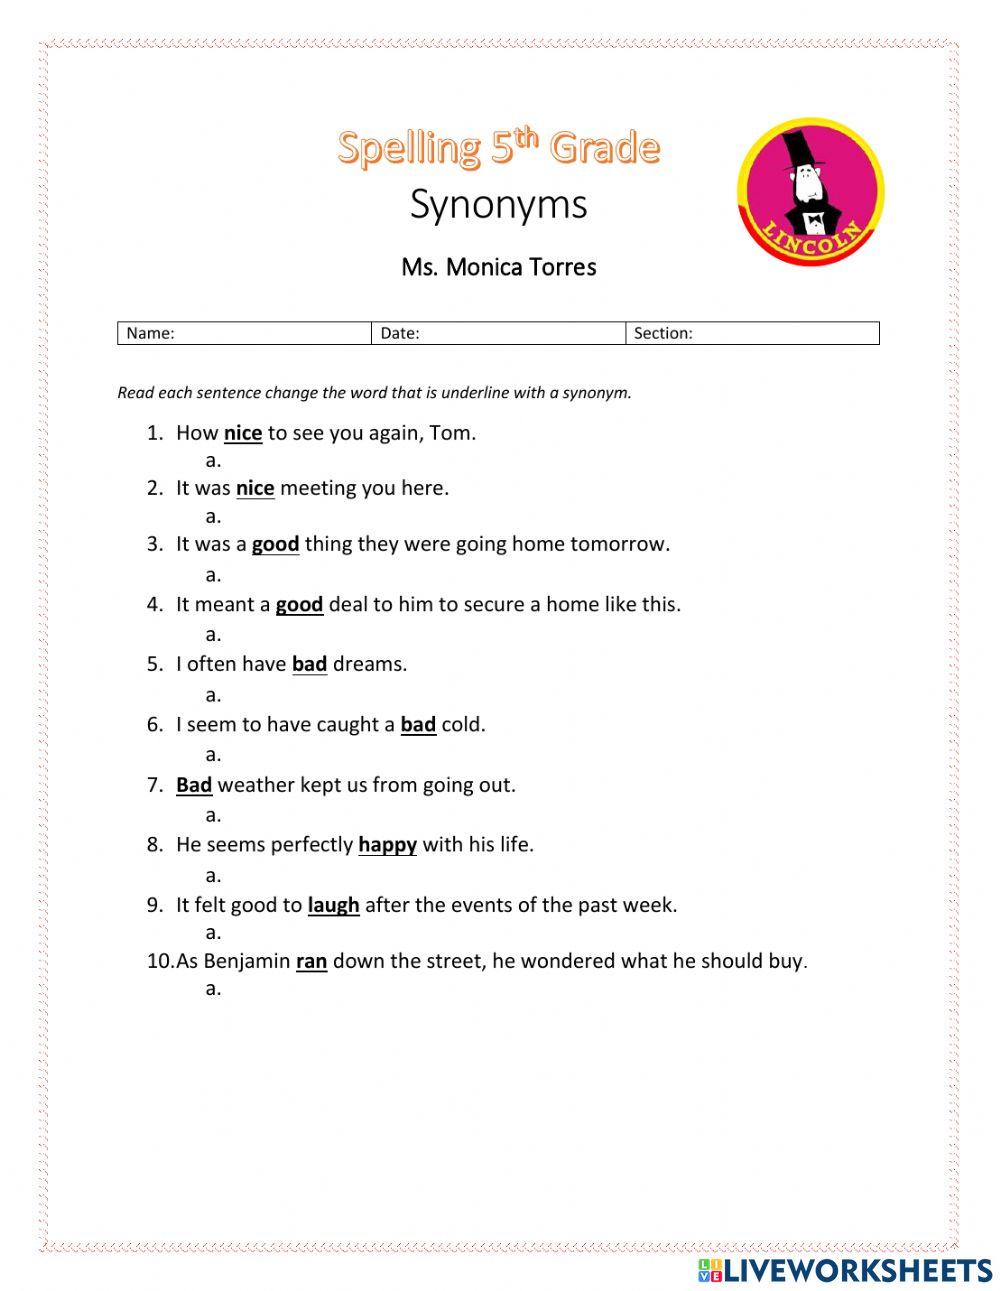 Synonyms: Other ways to say… worksheet | Live Worksheets